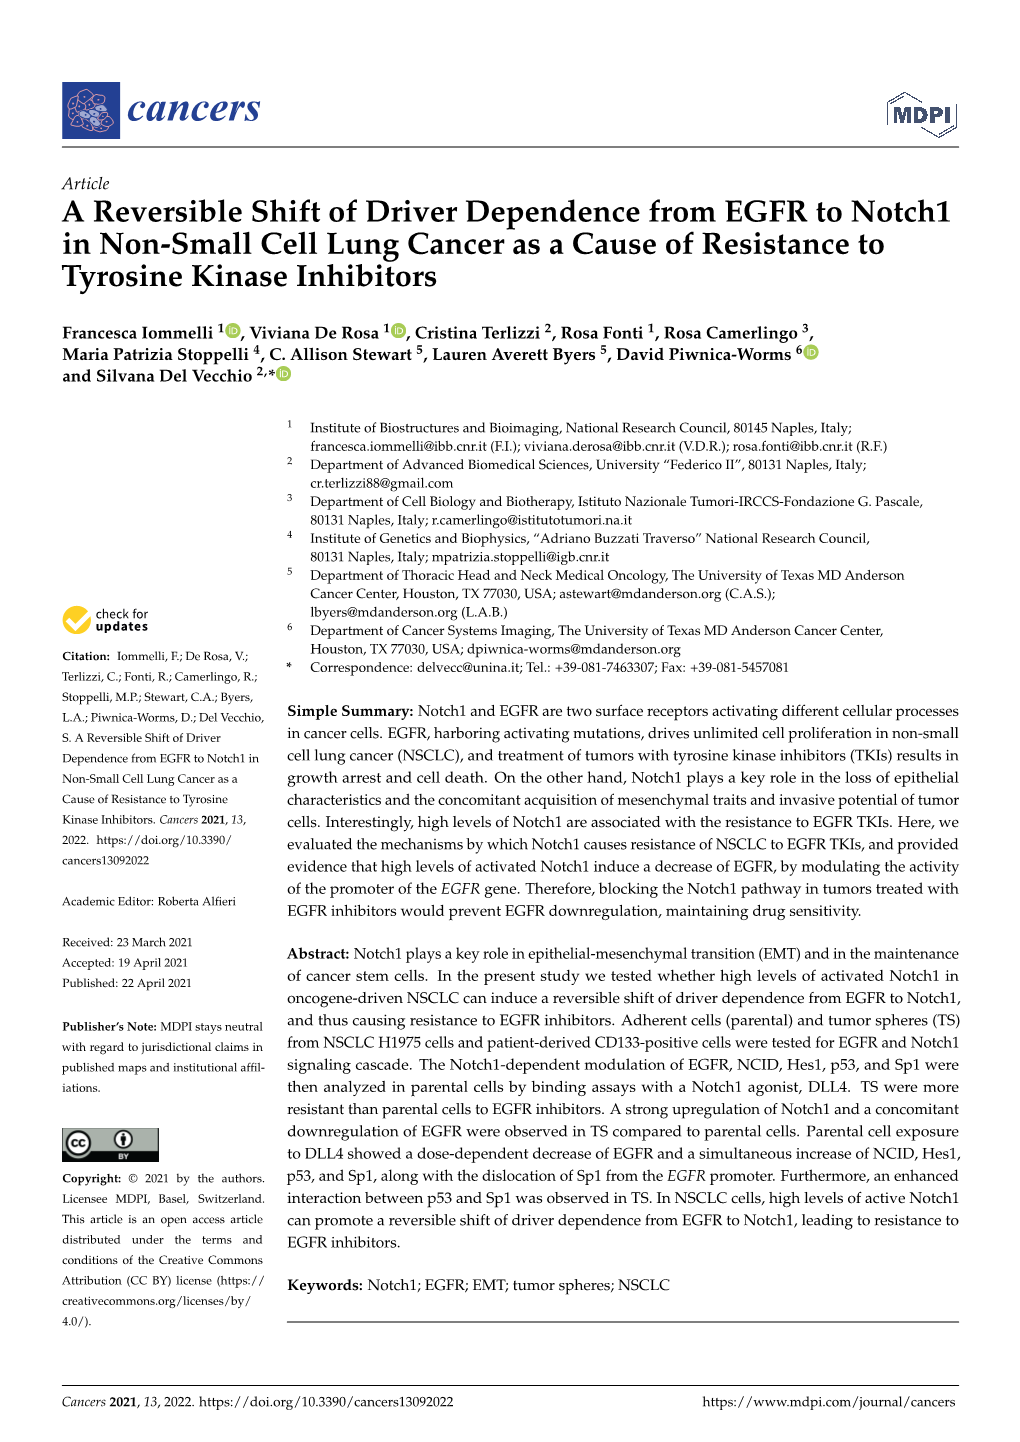 A Reversible Shift of Driver Dependence from EGFR to Notch1 in Non-Small Cell Lung Cancer As a Cause of Resistance to Tyrosine Kinase Inhibitors